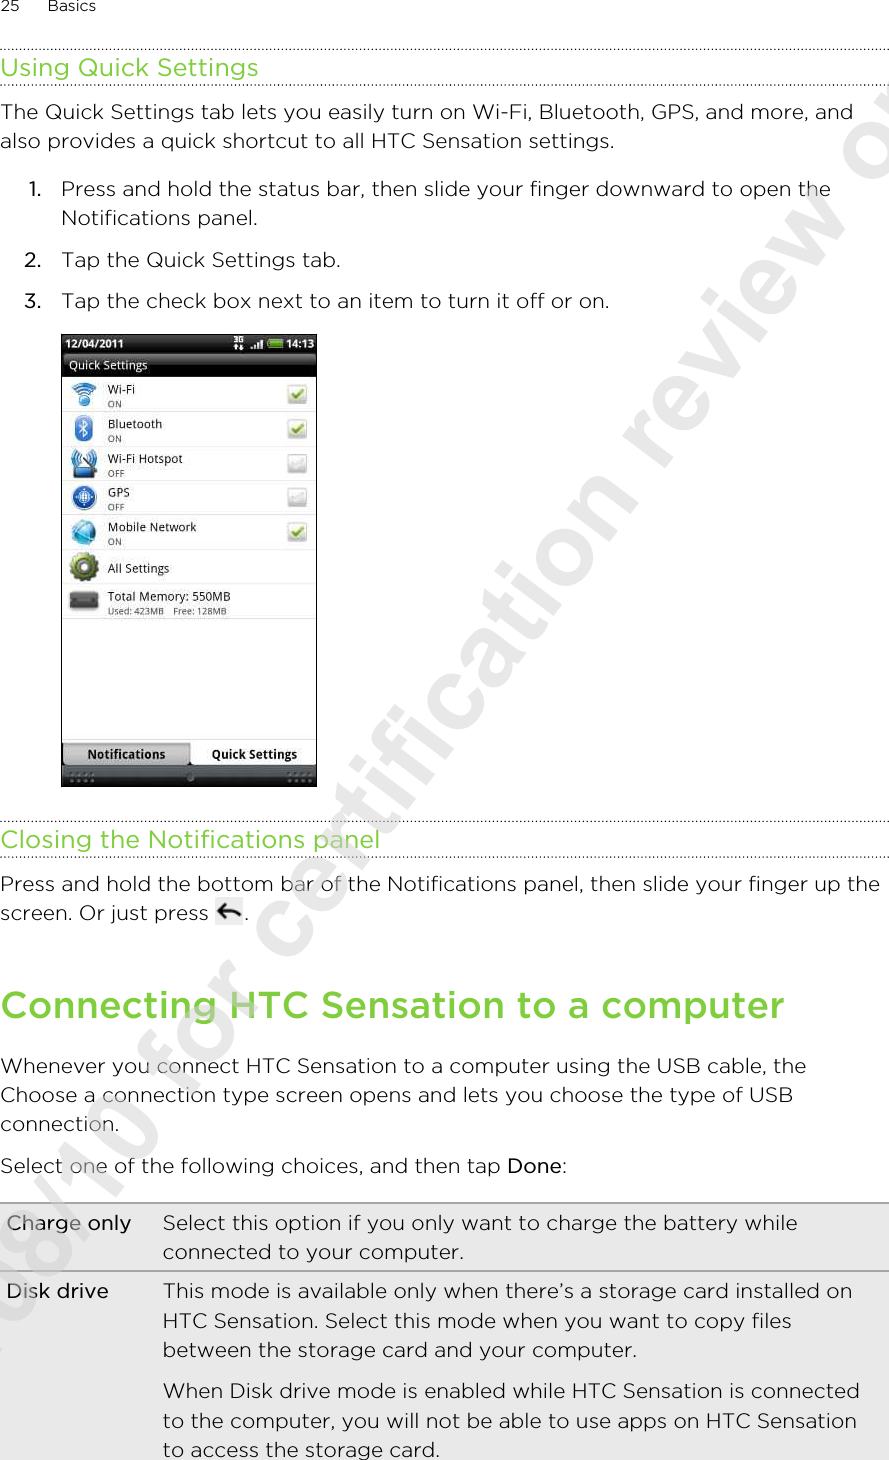 Using Quick SettingsThe Quick Settings tab lets you easily turn on Wi-Fi, Bluetooth, GPS, and more, andalso provides a quick shortcut to all HTC Sensation settings.1. Press and hold the status bar, then slide your finger downward to open theNotifications panel.2. Tap the Quick Settings tab.3. Tap the check box next to an item to turn it off or on. Closing the Notifications panelPress and hold the bottom bar of the Notifications panel, then slide your finger up thescreen. Or just press  .Connecting HTC Sensation to a computerWhenever you connect HTC Sensation to a computer using the USB cable, theChoose a connection type screen opens and lets you choose the type of USBconnection.Select one of the following choices, and then tap Done:Charge only Select this option if you only want to charge the battery whileconnected to your computer.Disk drive This mode is available only when there’s a storage card installed onHTC Sensation. Select this mode when you want to copy filesbetween the storage card and your computer.When Disk drive mode is enabled while HTC Sensation is connectedto the computer, you will not be able to use apps on HTC Sensationto access the storage card.25 Basics2011/08/10 for certification review only